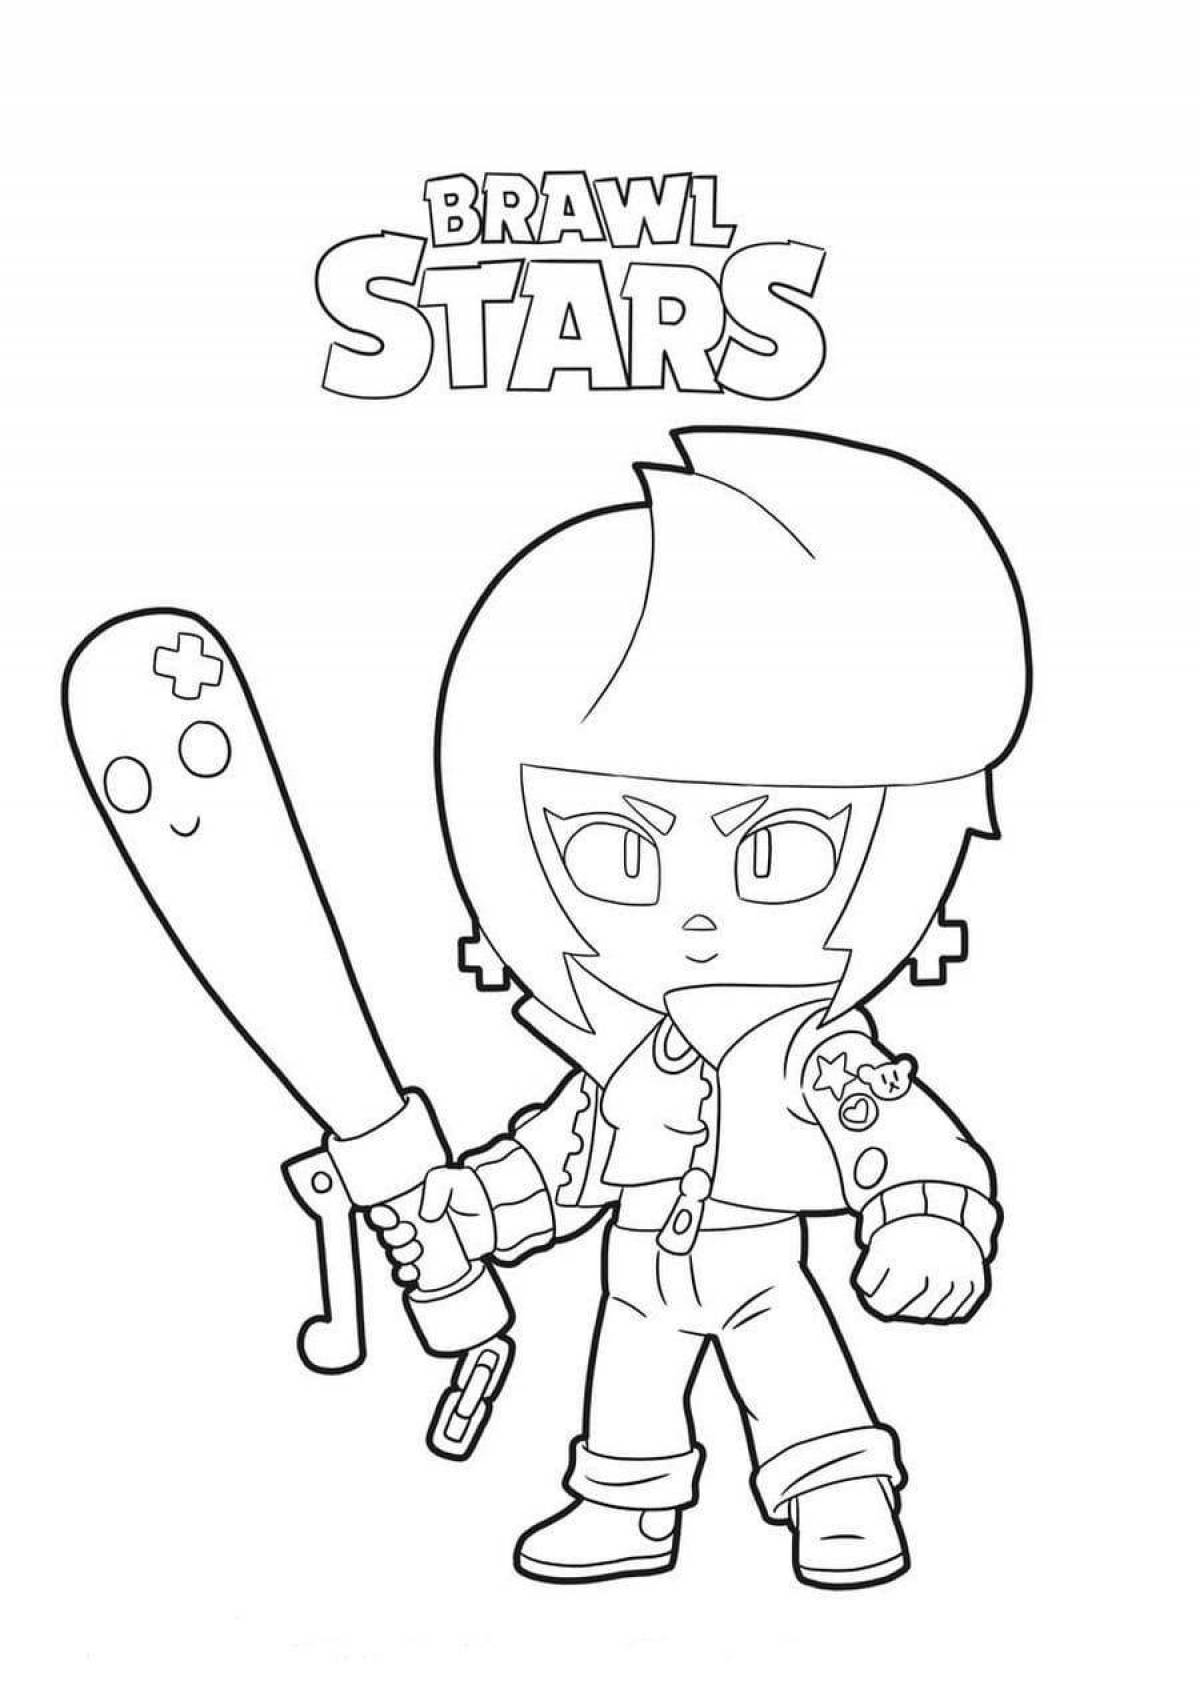 Blavar stars coloring pages